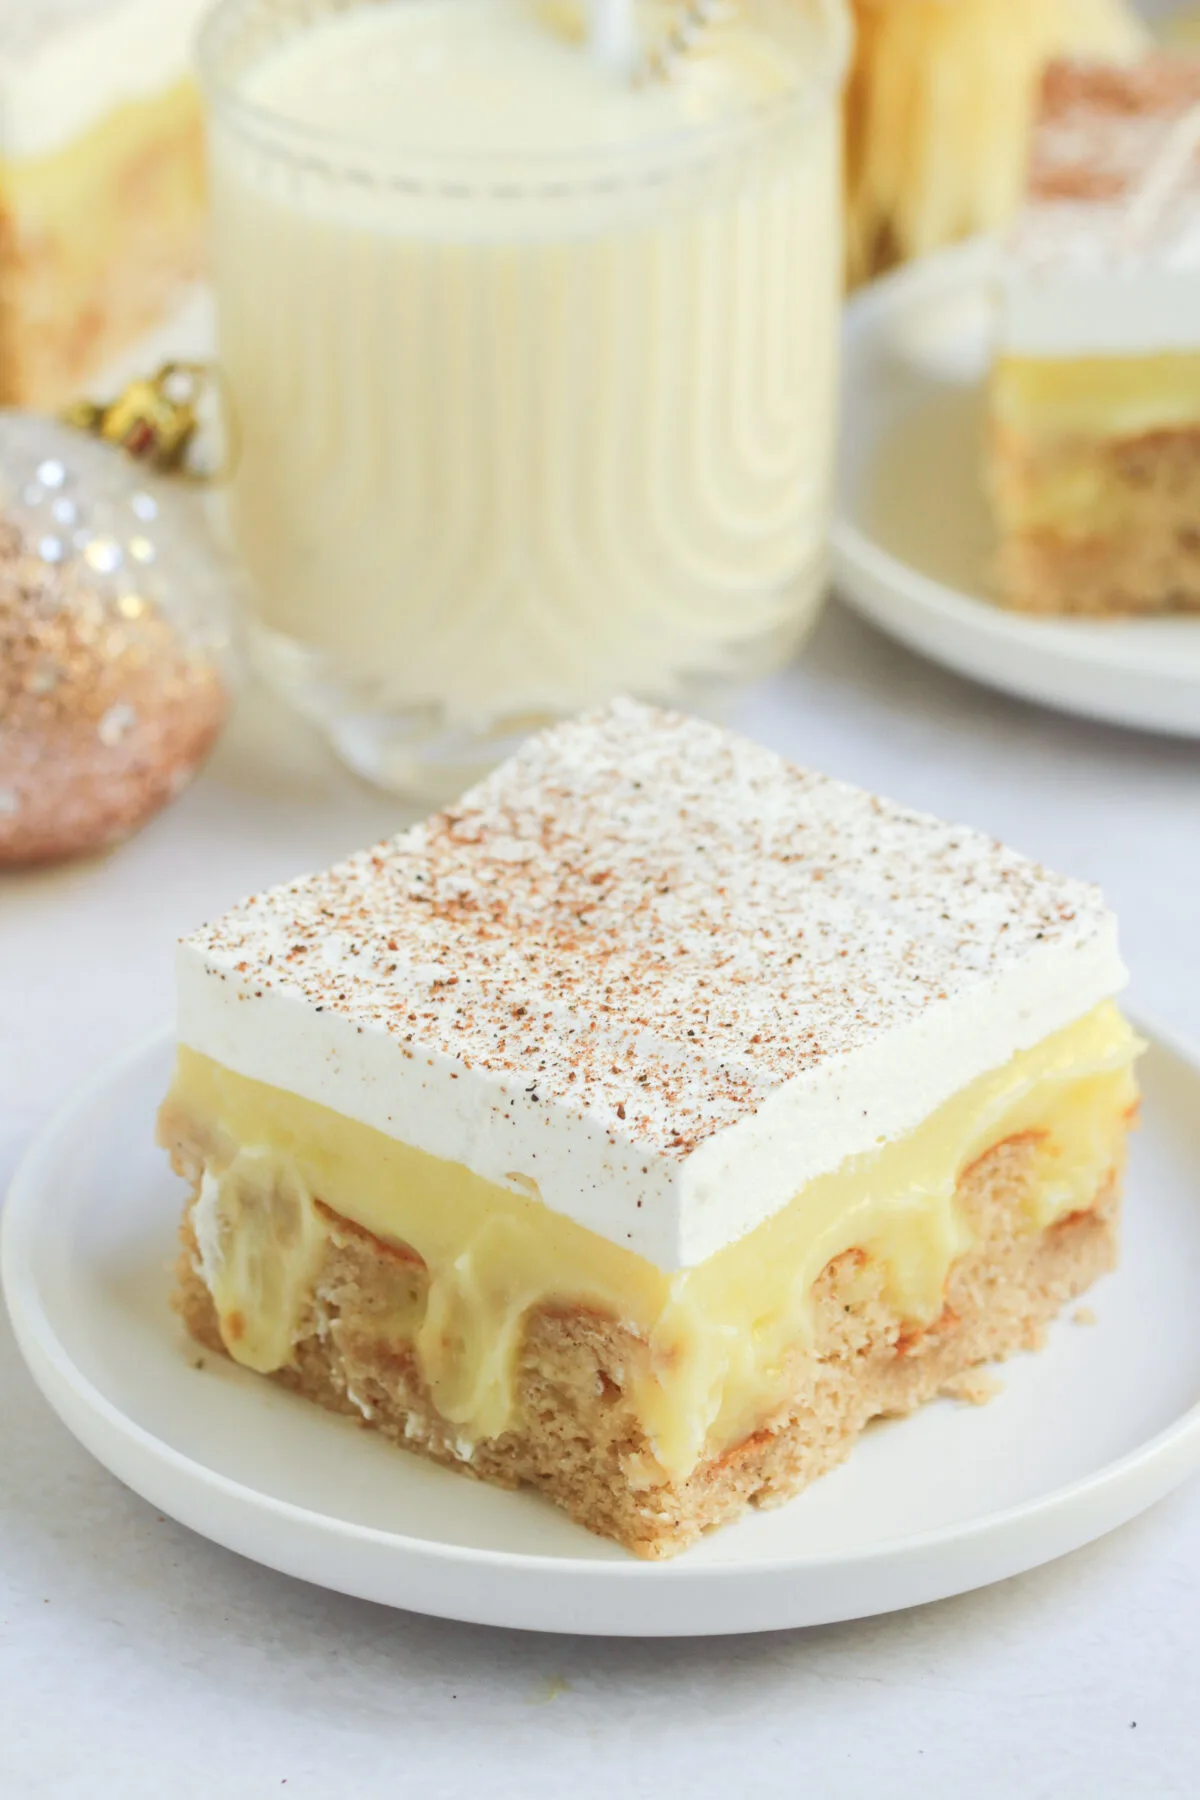 Celebrate the holidays with this eggnog poke cake topped with a creamy eggnog pudding filling and whipped topping dusted with nutmeg.